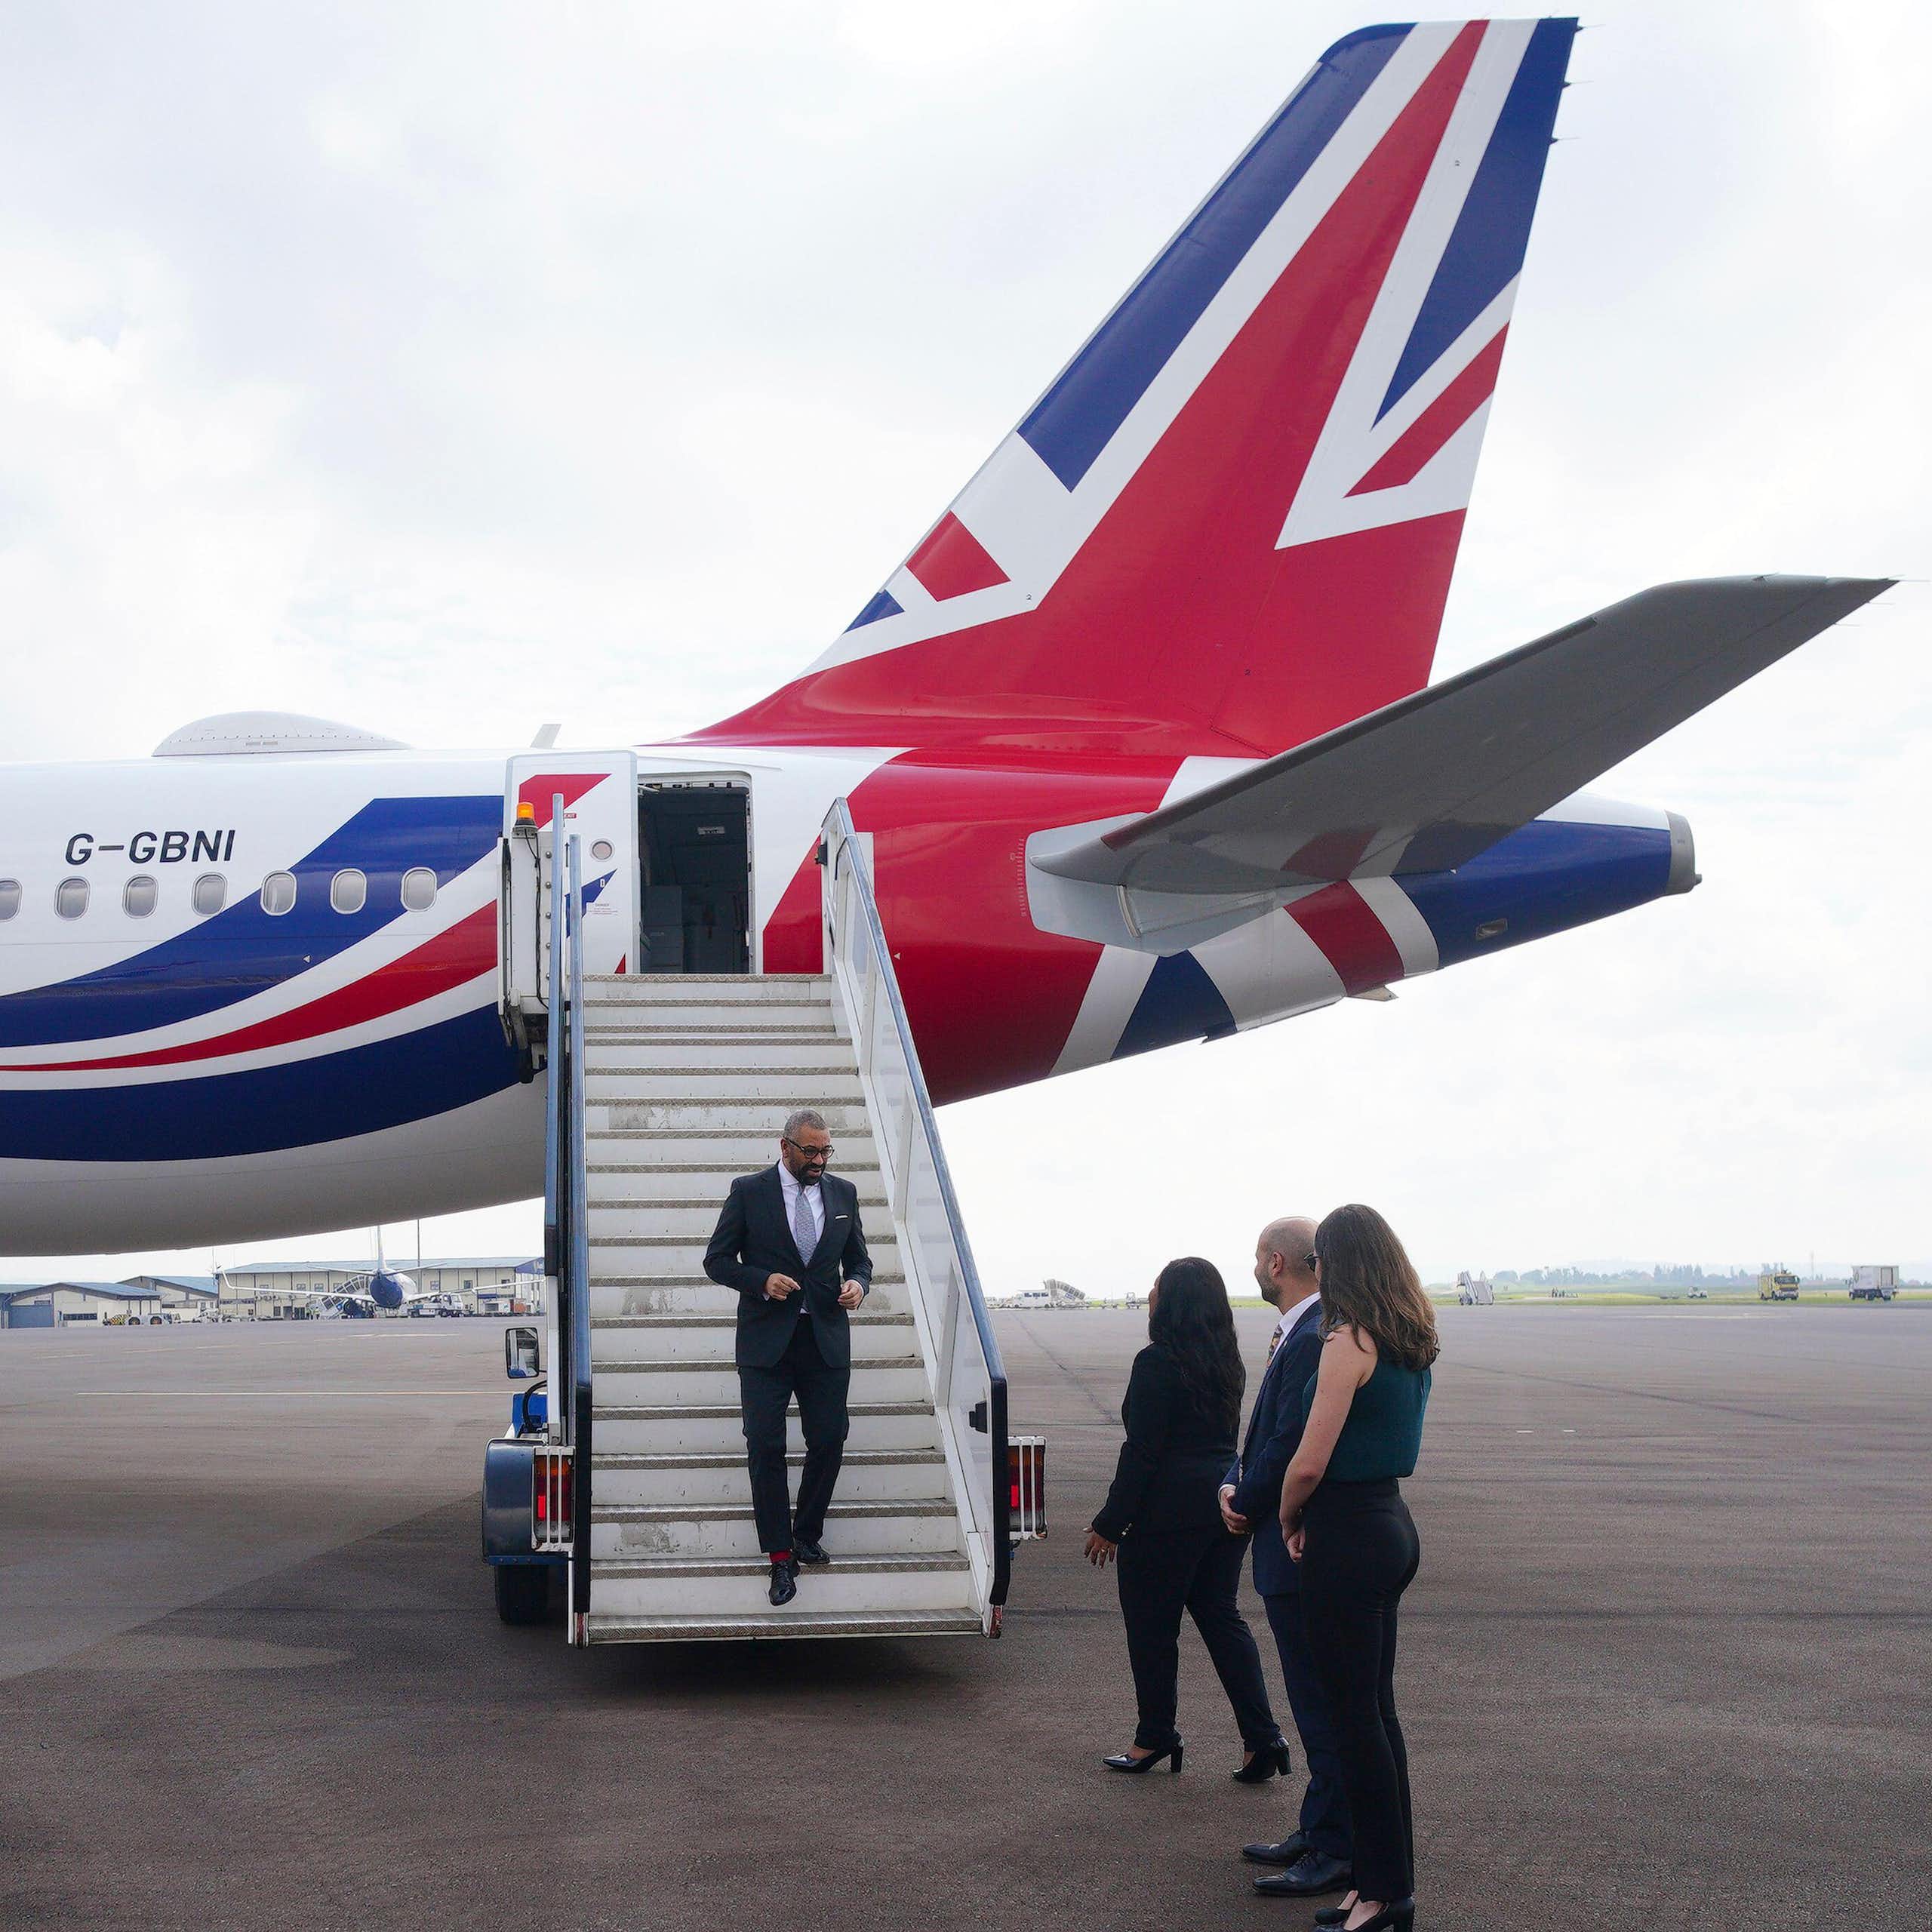 James Cleverly walks off the plane at at Kigali International Airport in Rwanda. He is at the bottom of a flight of stairs off of a large plane with the tail in a UK flag design